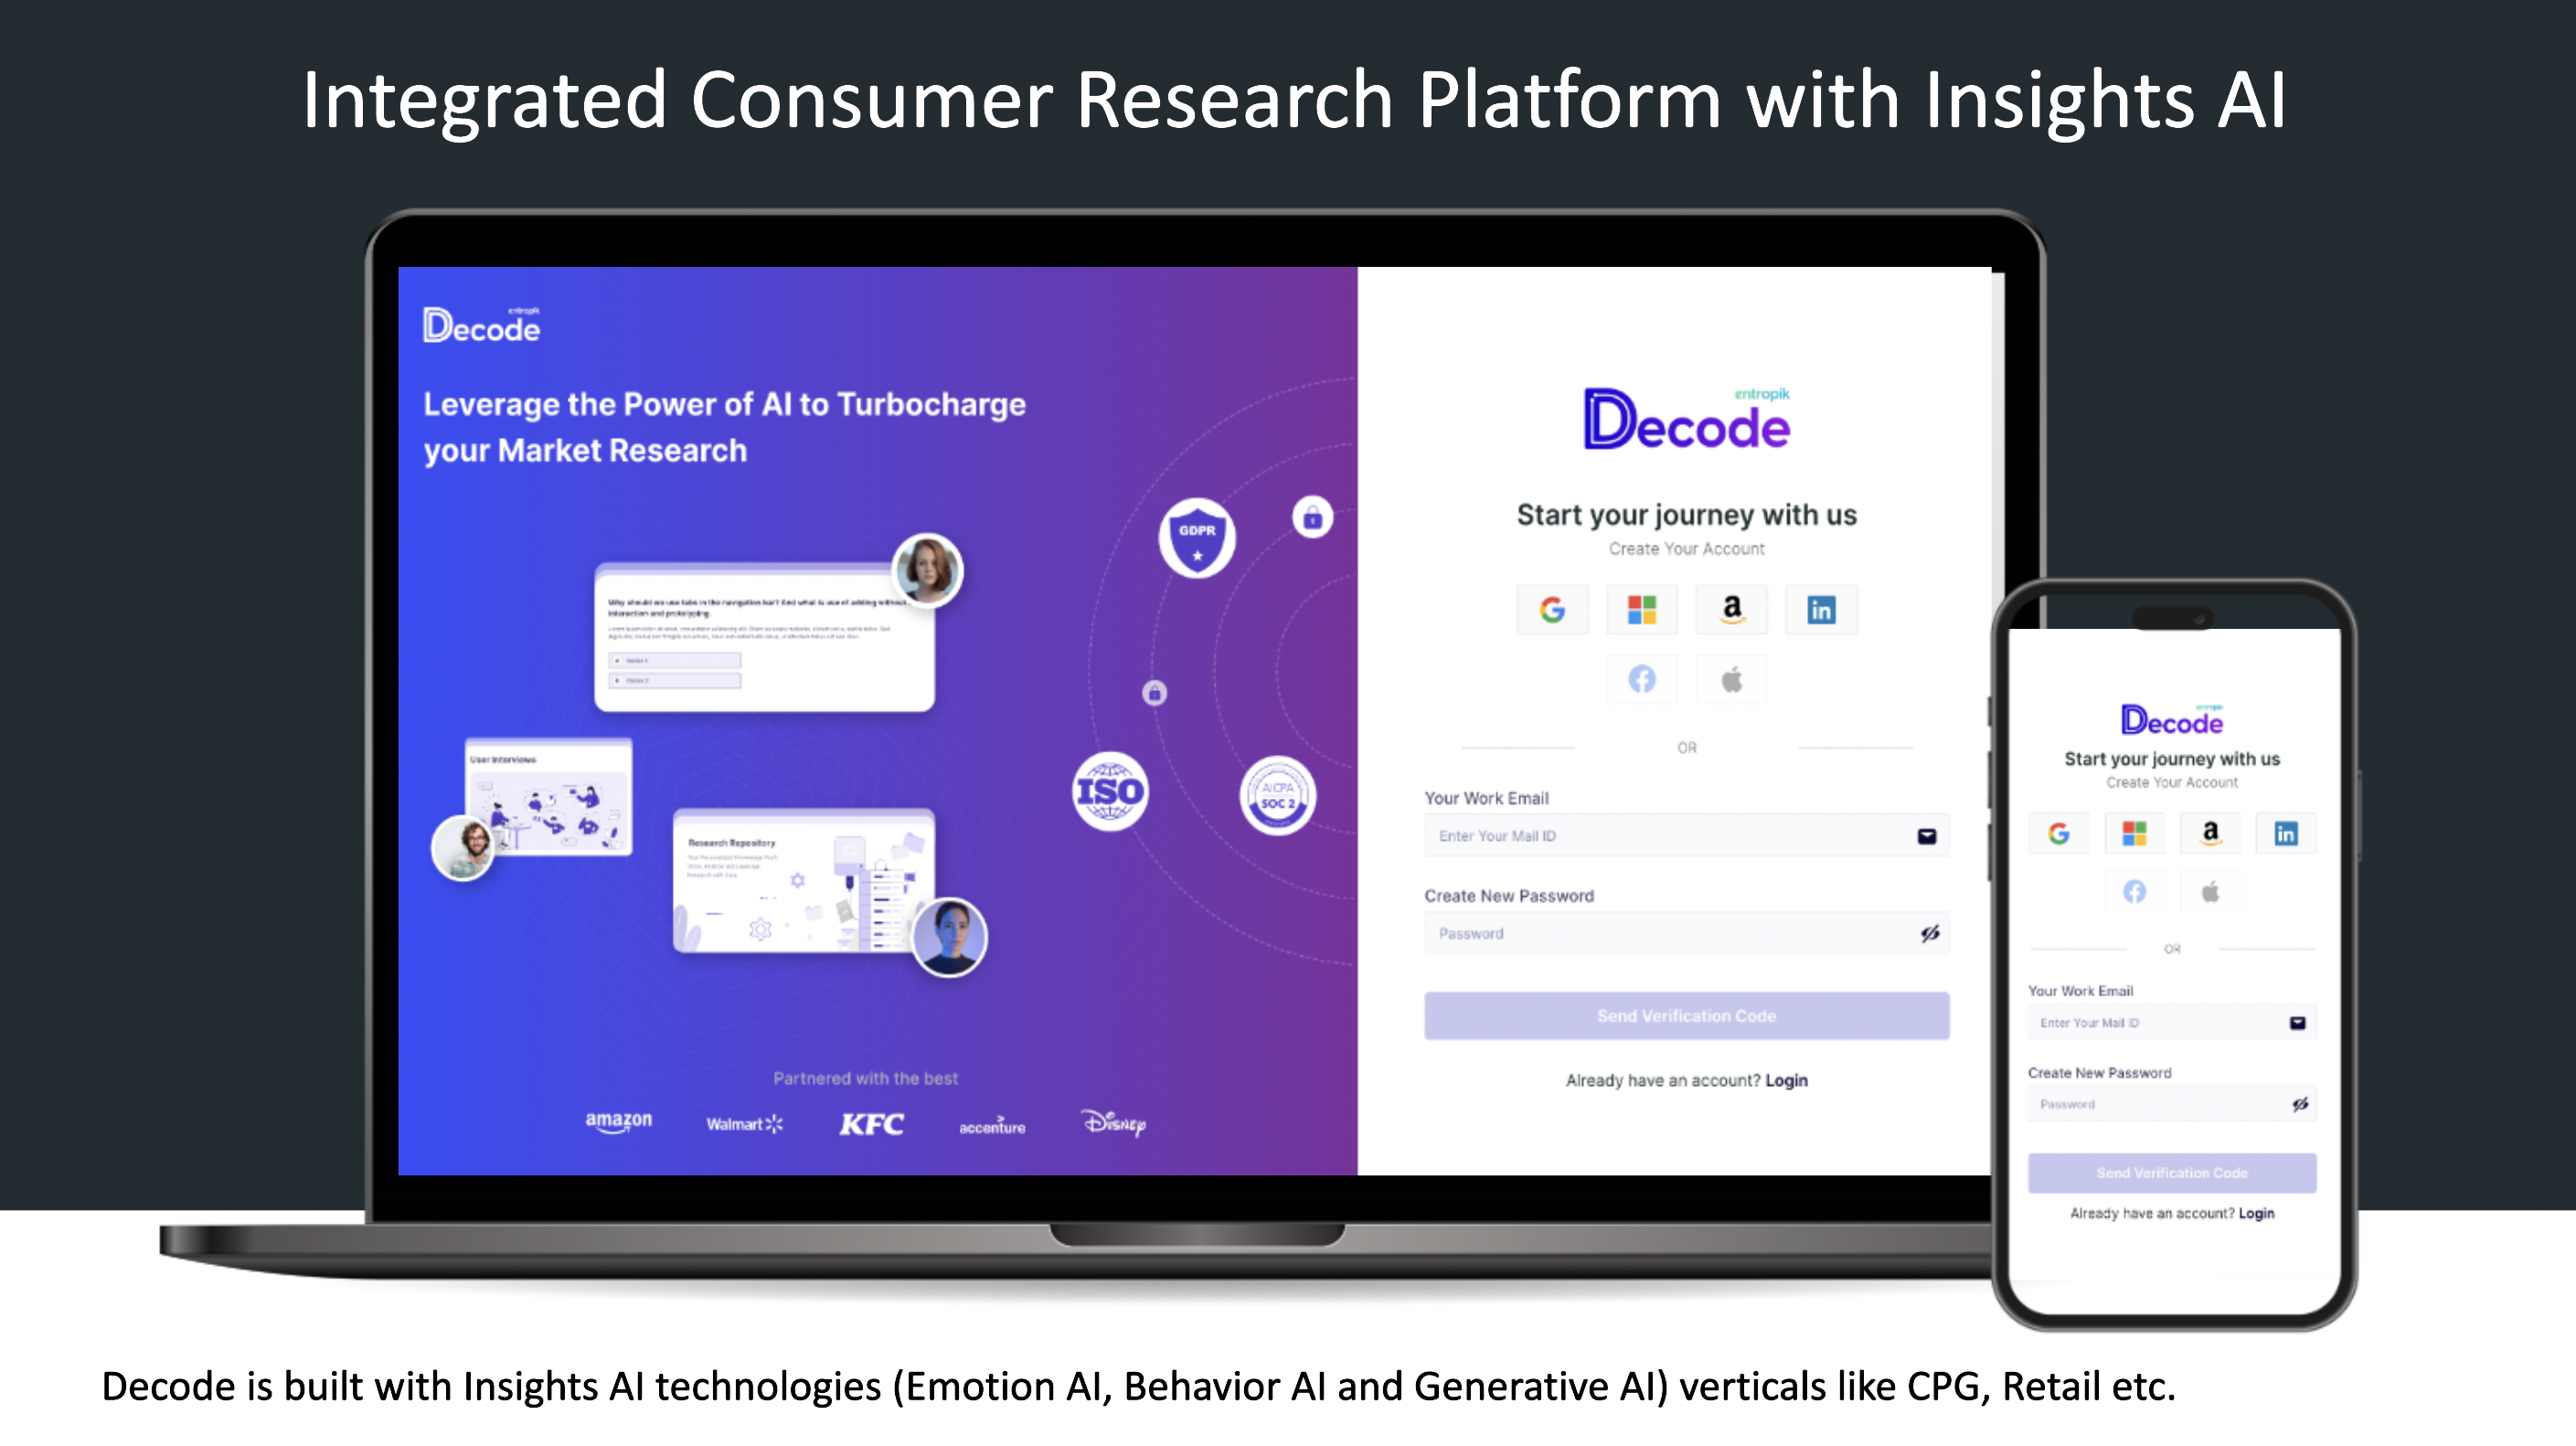 Decode is built with Insights AI technologies (Emotion AI, Behavior AI and Generative AI) verticals like CPG, Retail etc.​